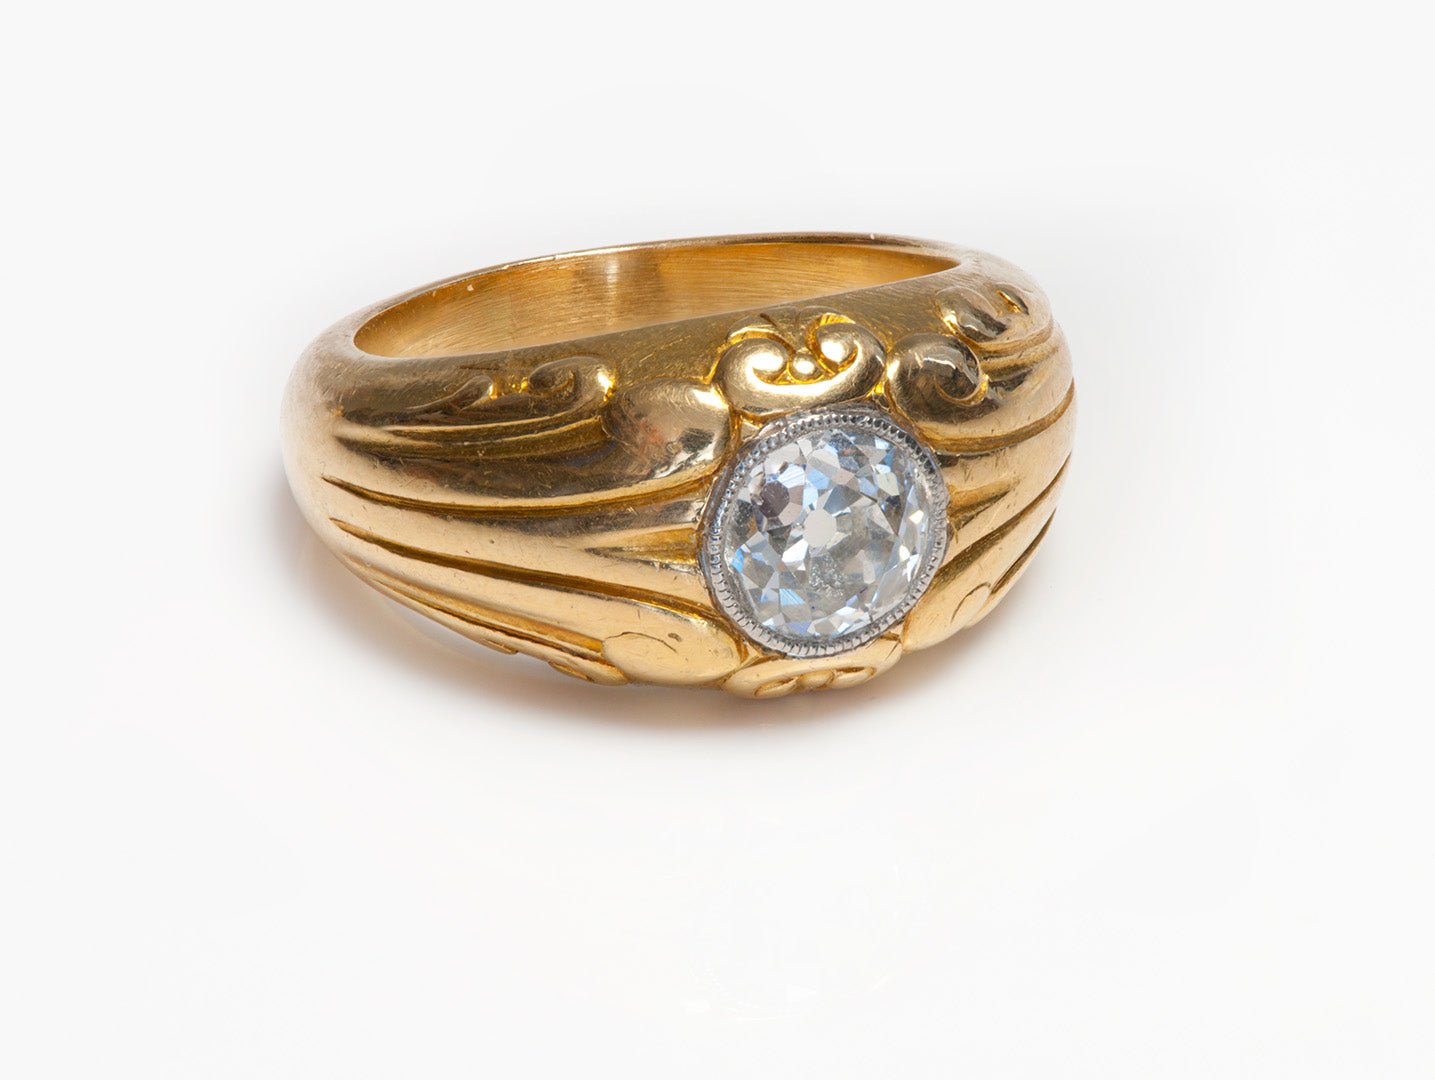 Belle Epoque 18K Gold Old Mine Cut Diamond Ring - DSF Antique Jewelry